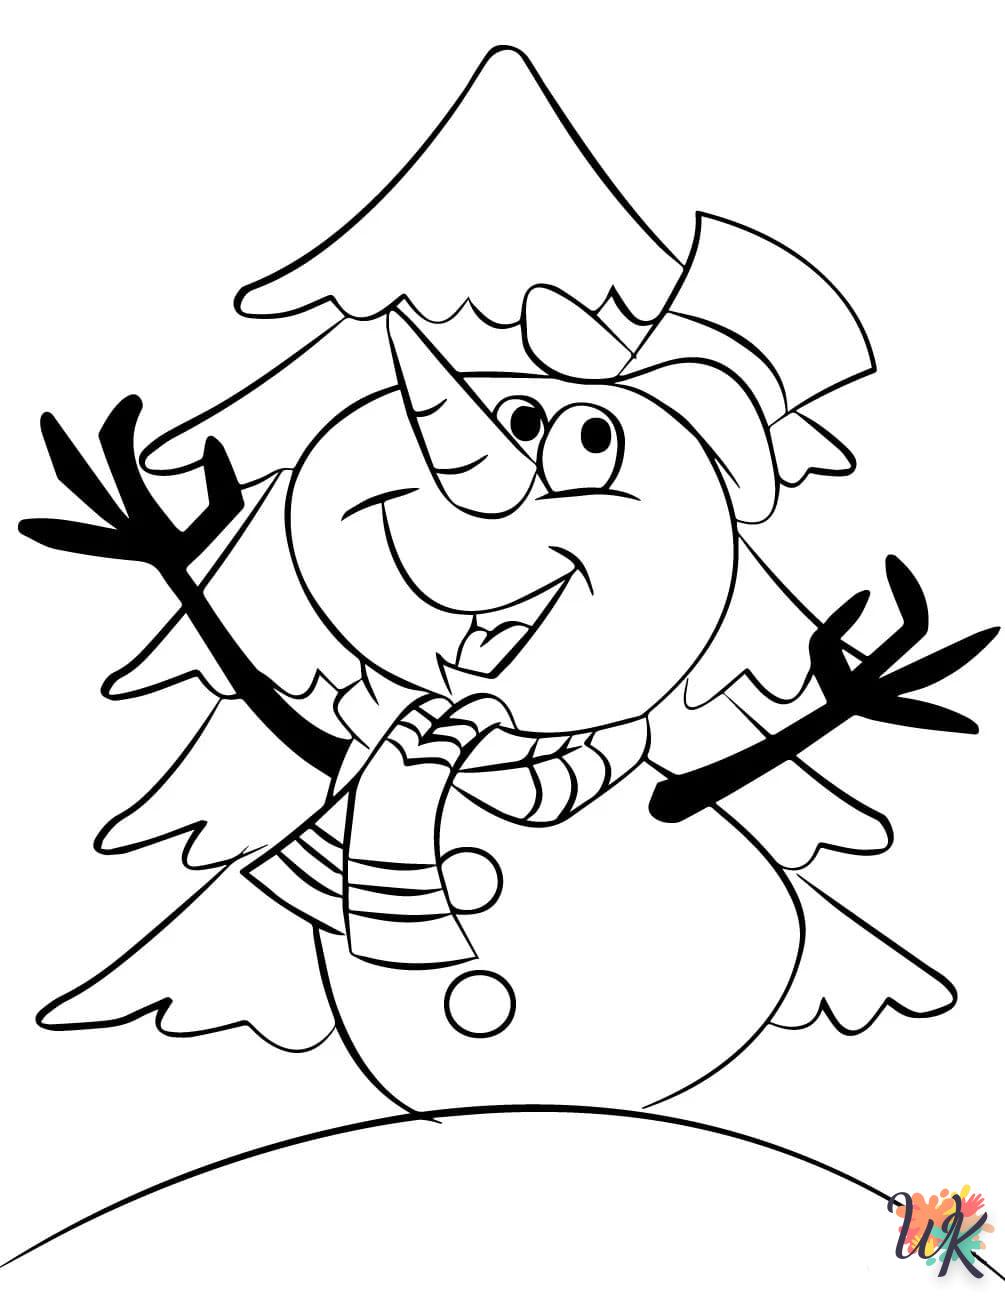 Snowman coloring page for children to print